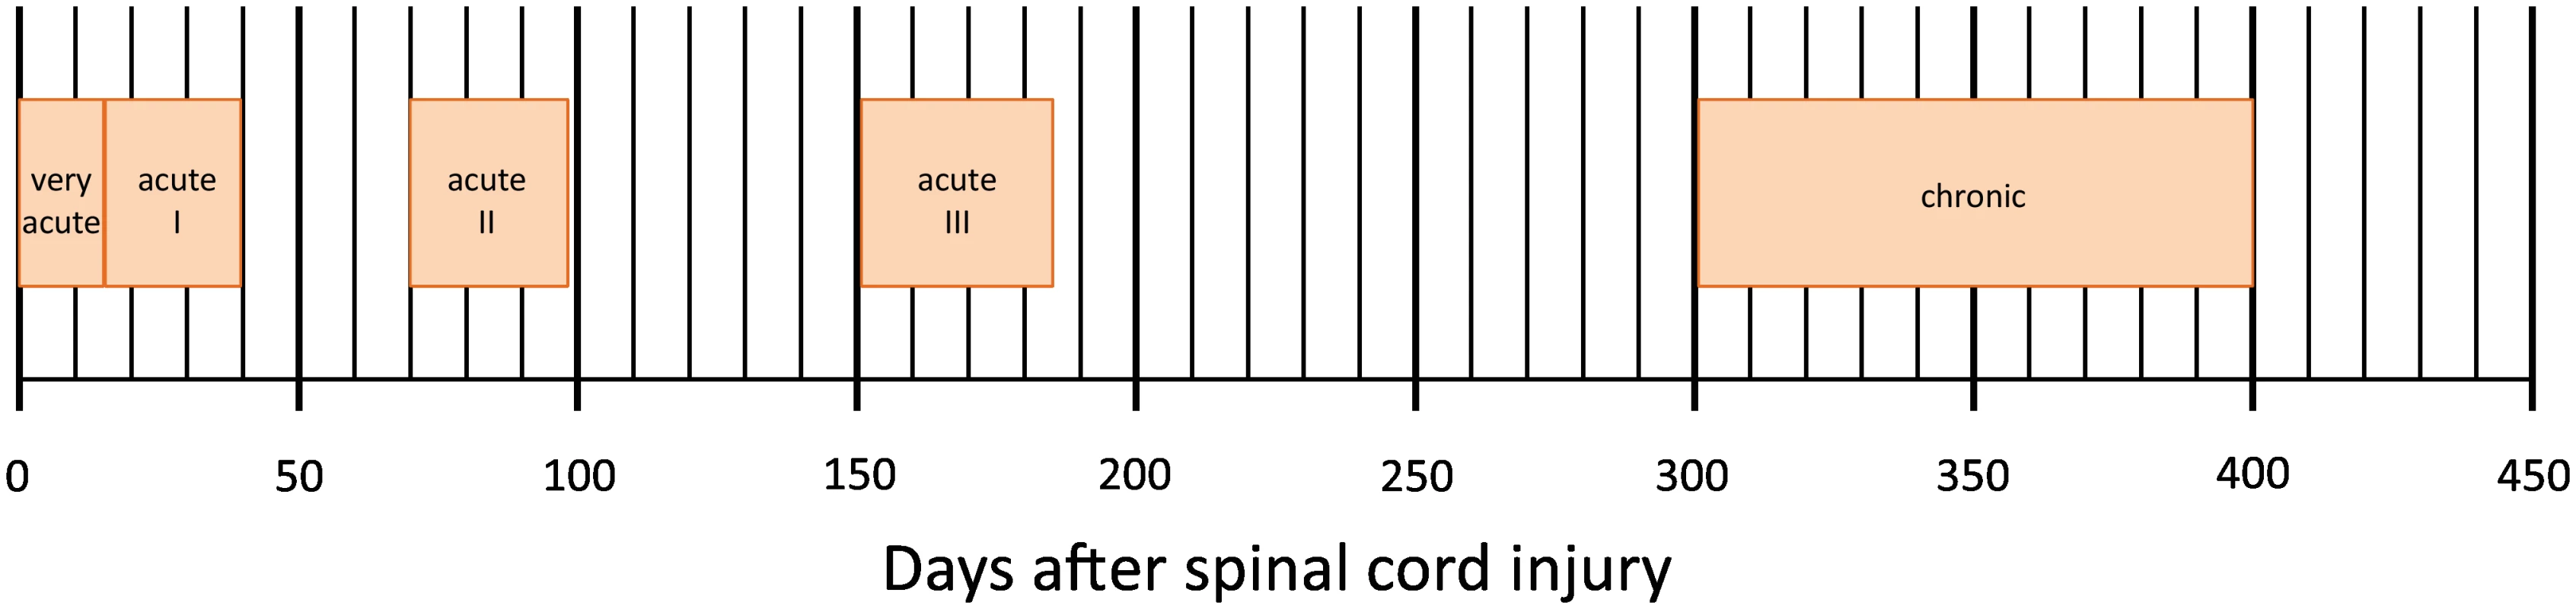 Time schedule of assessments in days after spinal cord injury of the European Multicenter Study about Spinal Cord Injury (EMSCI, &lt;a href=&quot;http://www.emsci.org&quot;&gt;www.emsci.org&lt;/a&gt;).